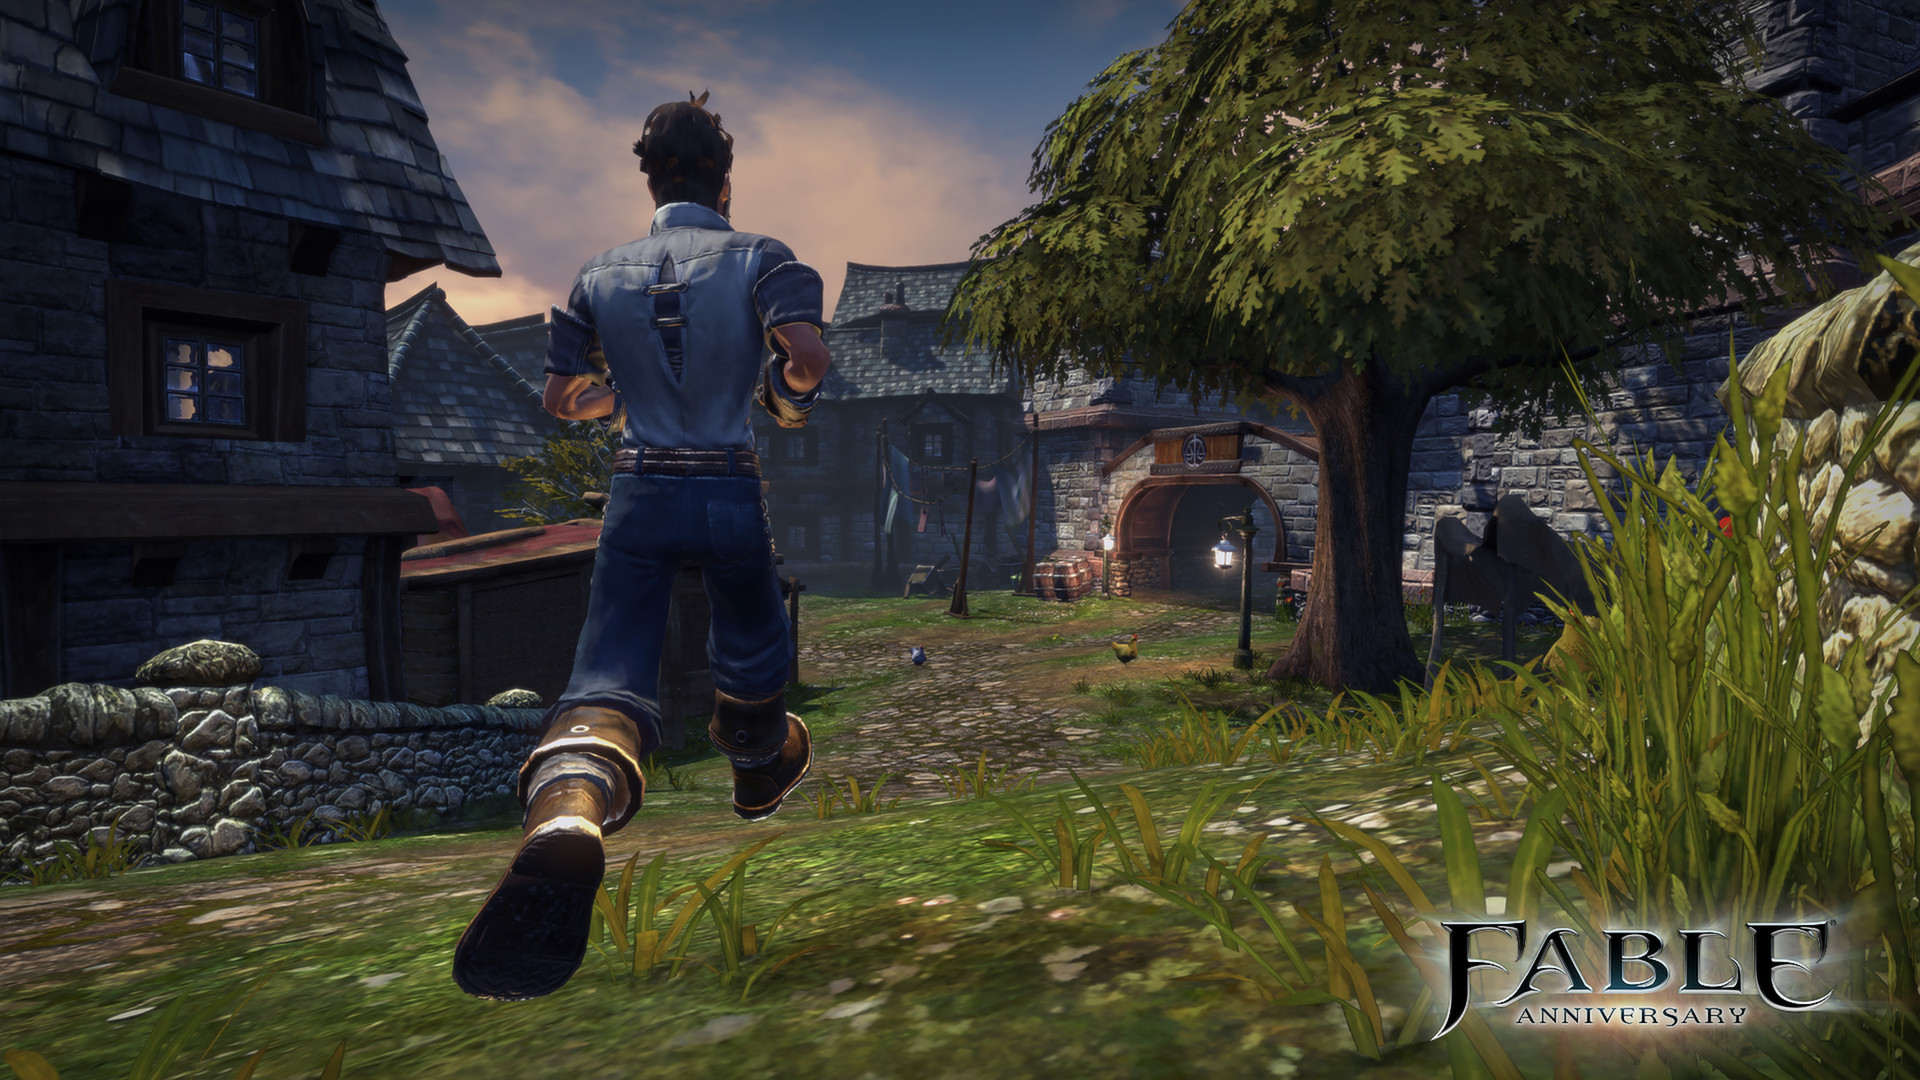 Fable Anniversary Images 